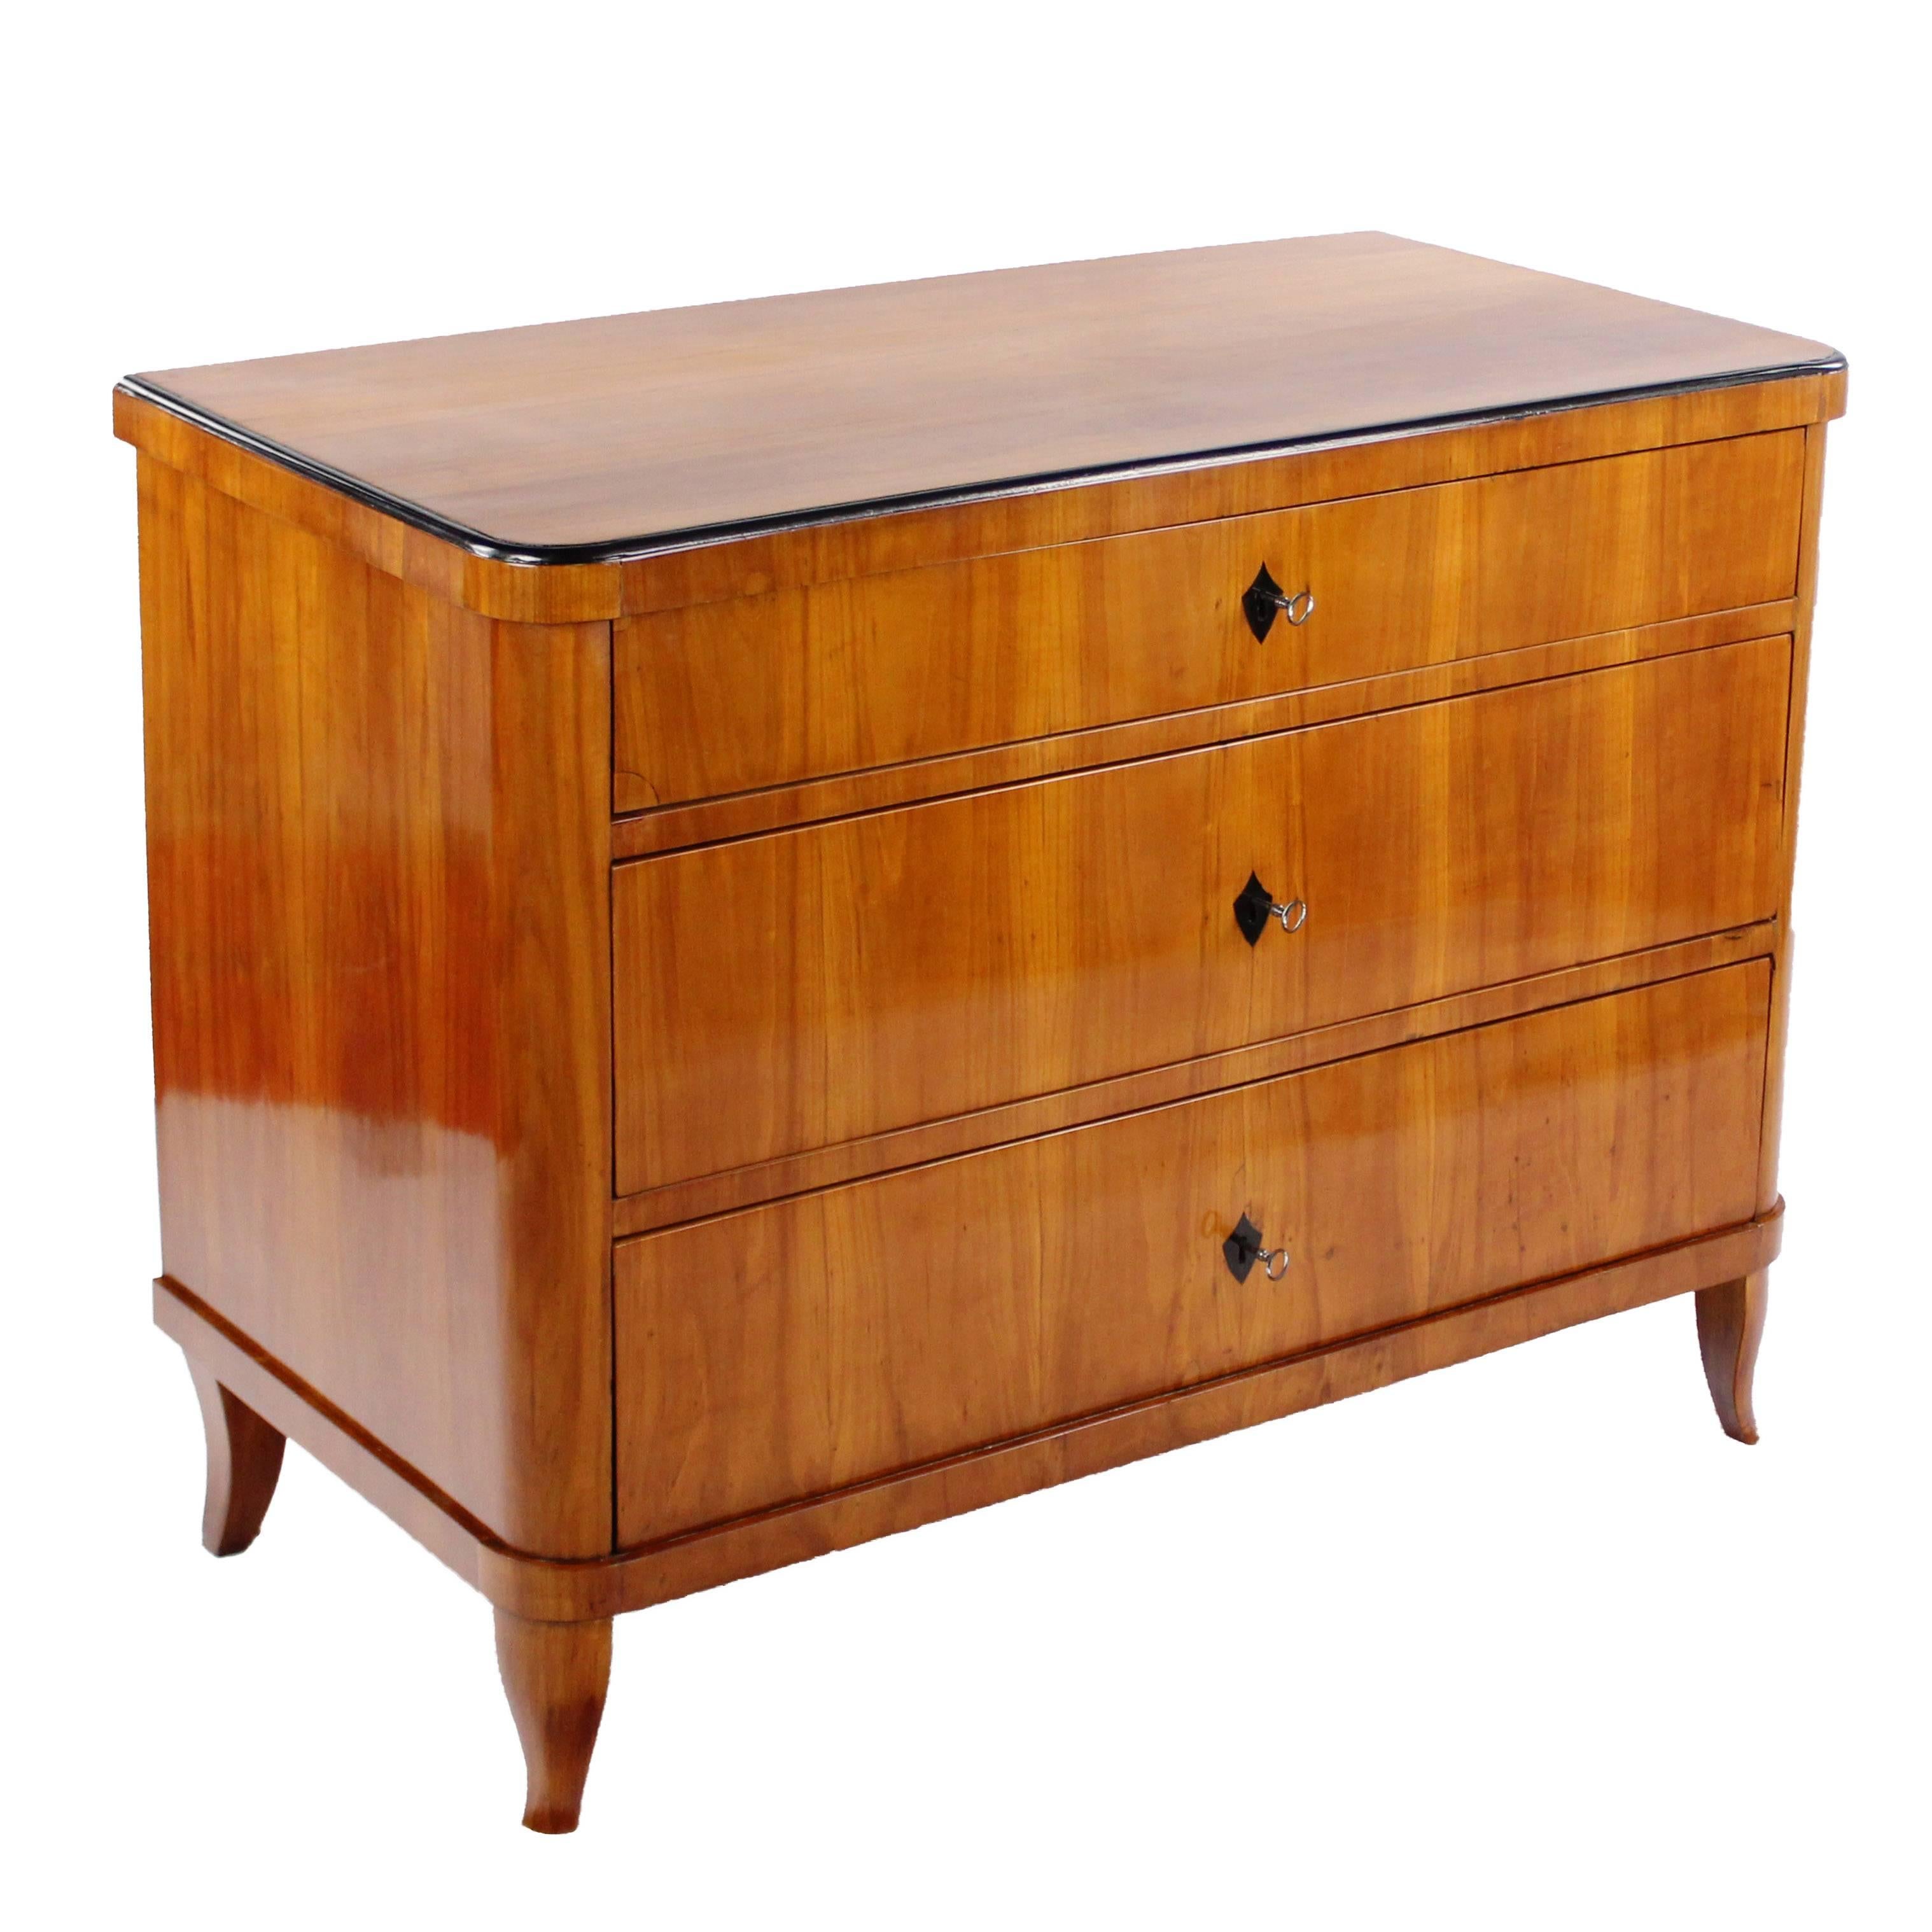 Chest of drawers, circa 1820-1830
Cherry tree on softwood body veneered
Three drawers
Nice veneer image
Rounded corners
Some parts ebonized
Restored residential-ready state
French Shellac hand polish
Height: 85 cm, width: 110 cm, depth: 56